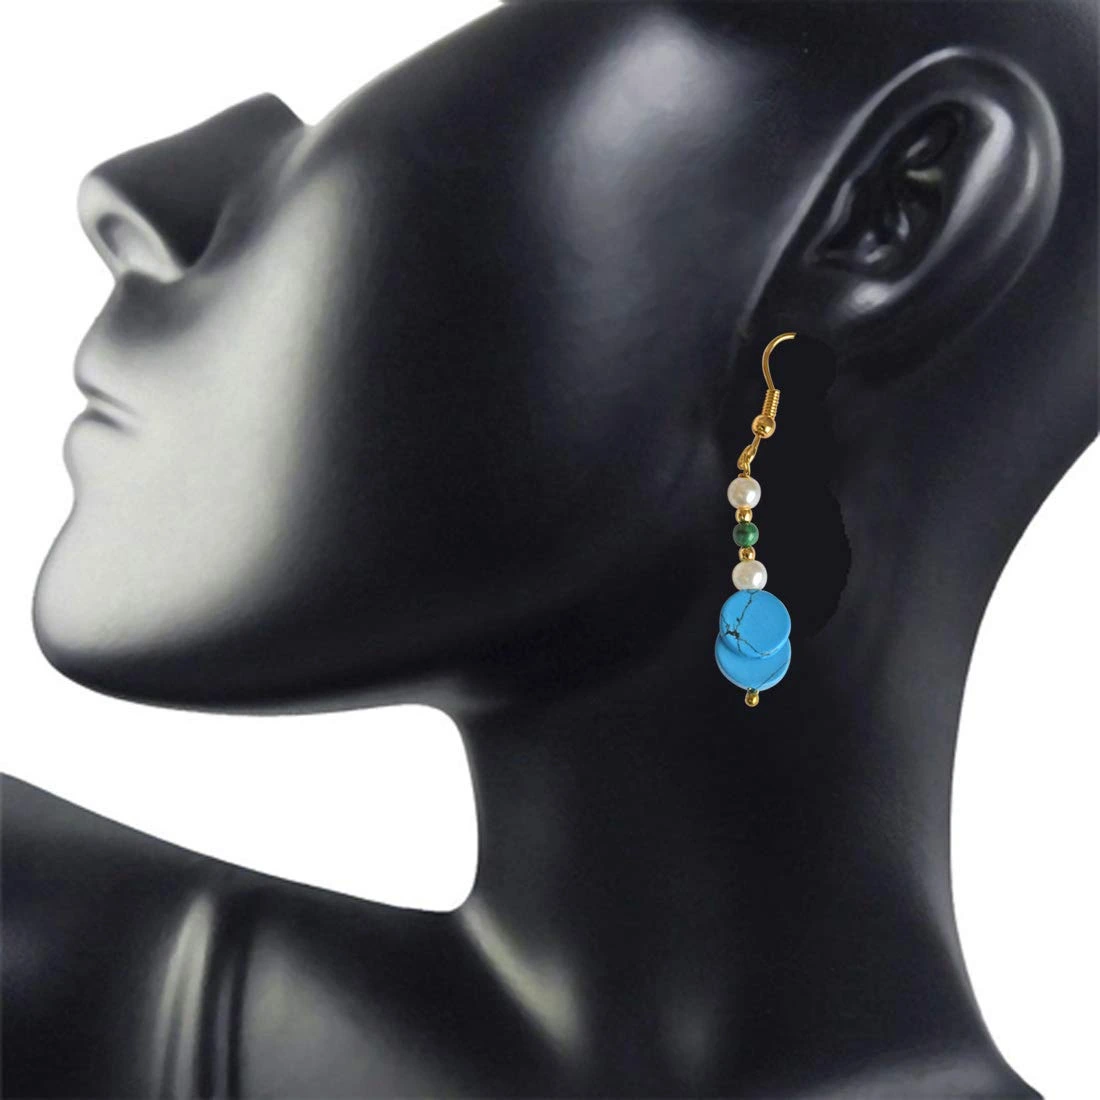 Gold Plated Hanging Earring with Pearl, Malachite and Turquoise Gemstones for Women (SE259)